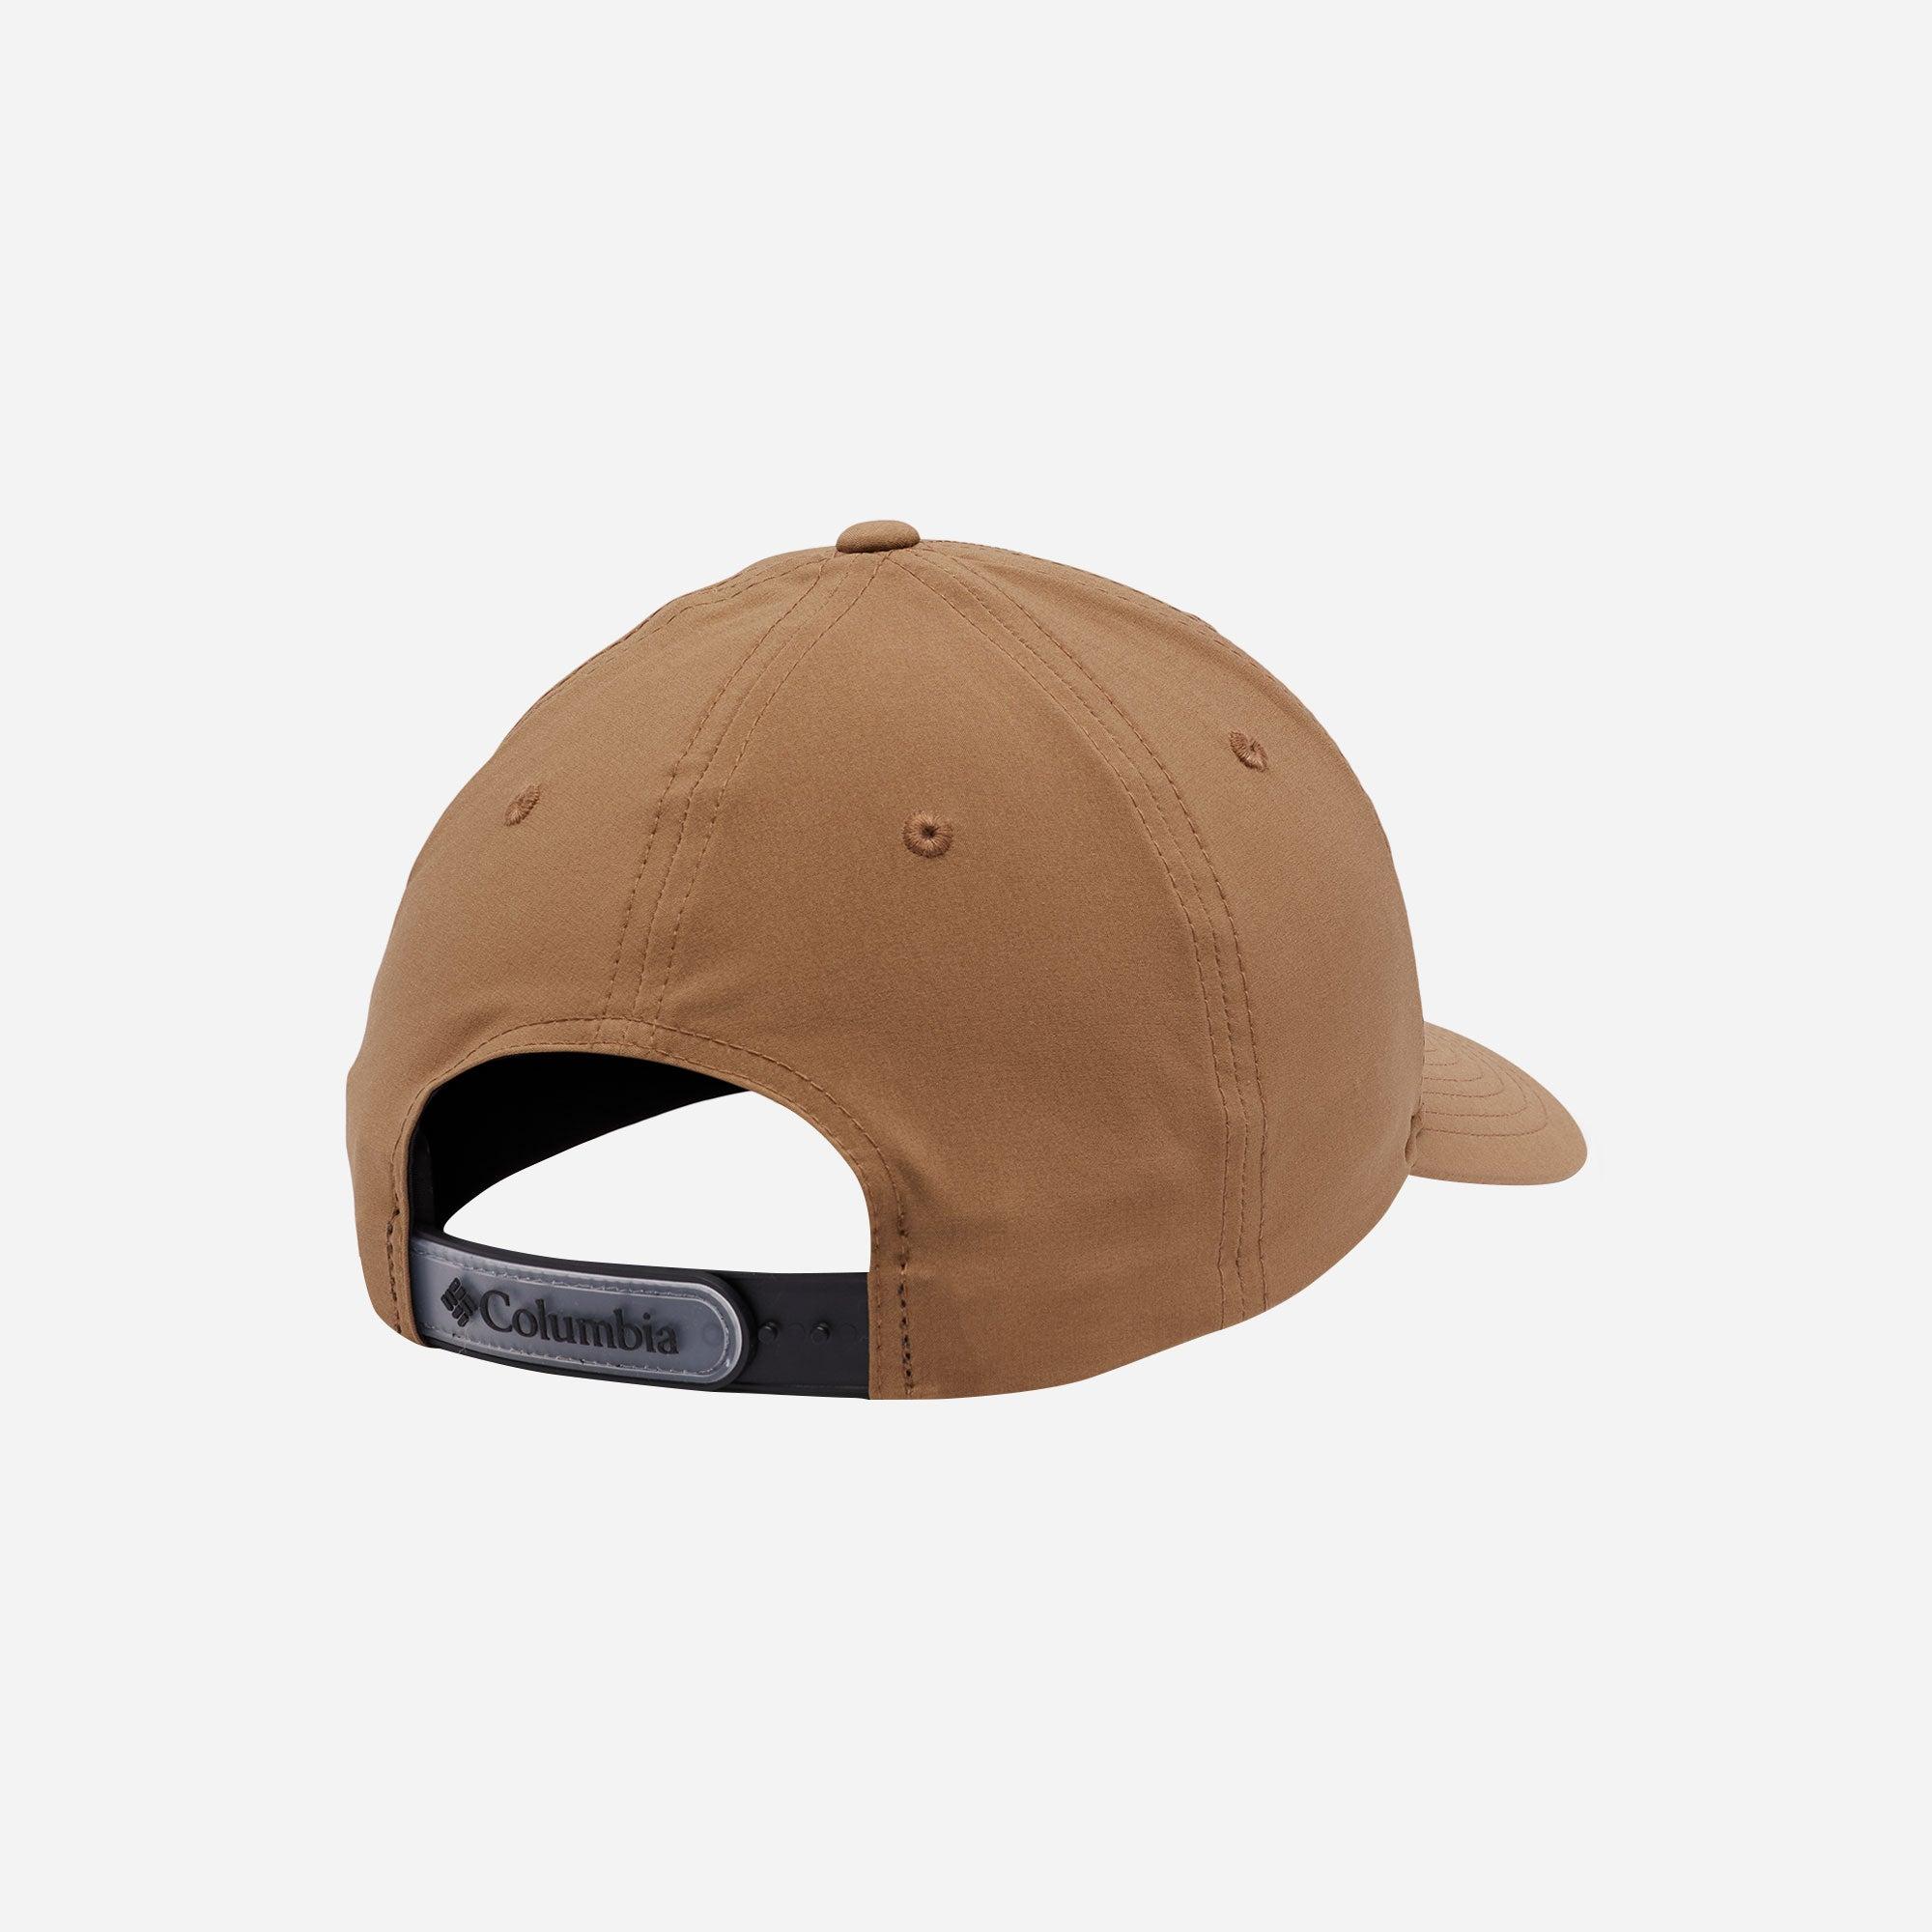 Nón thể thao unisex Columbia Maxtrail 110 Snap Back - 1886771258